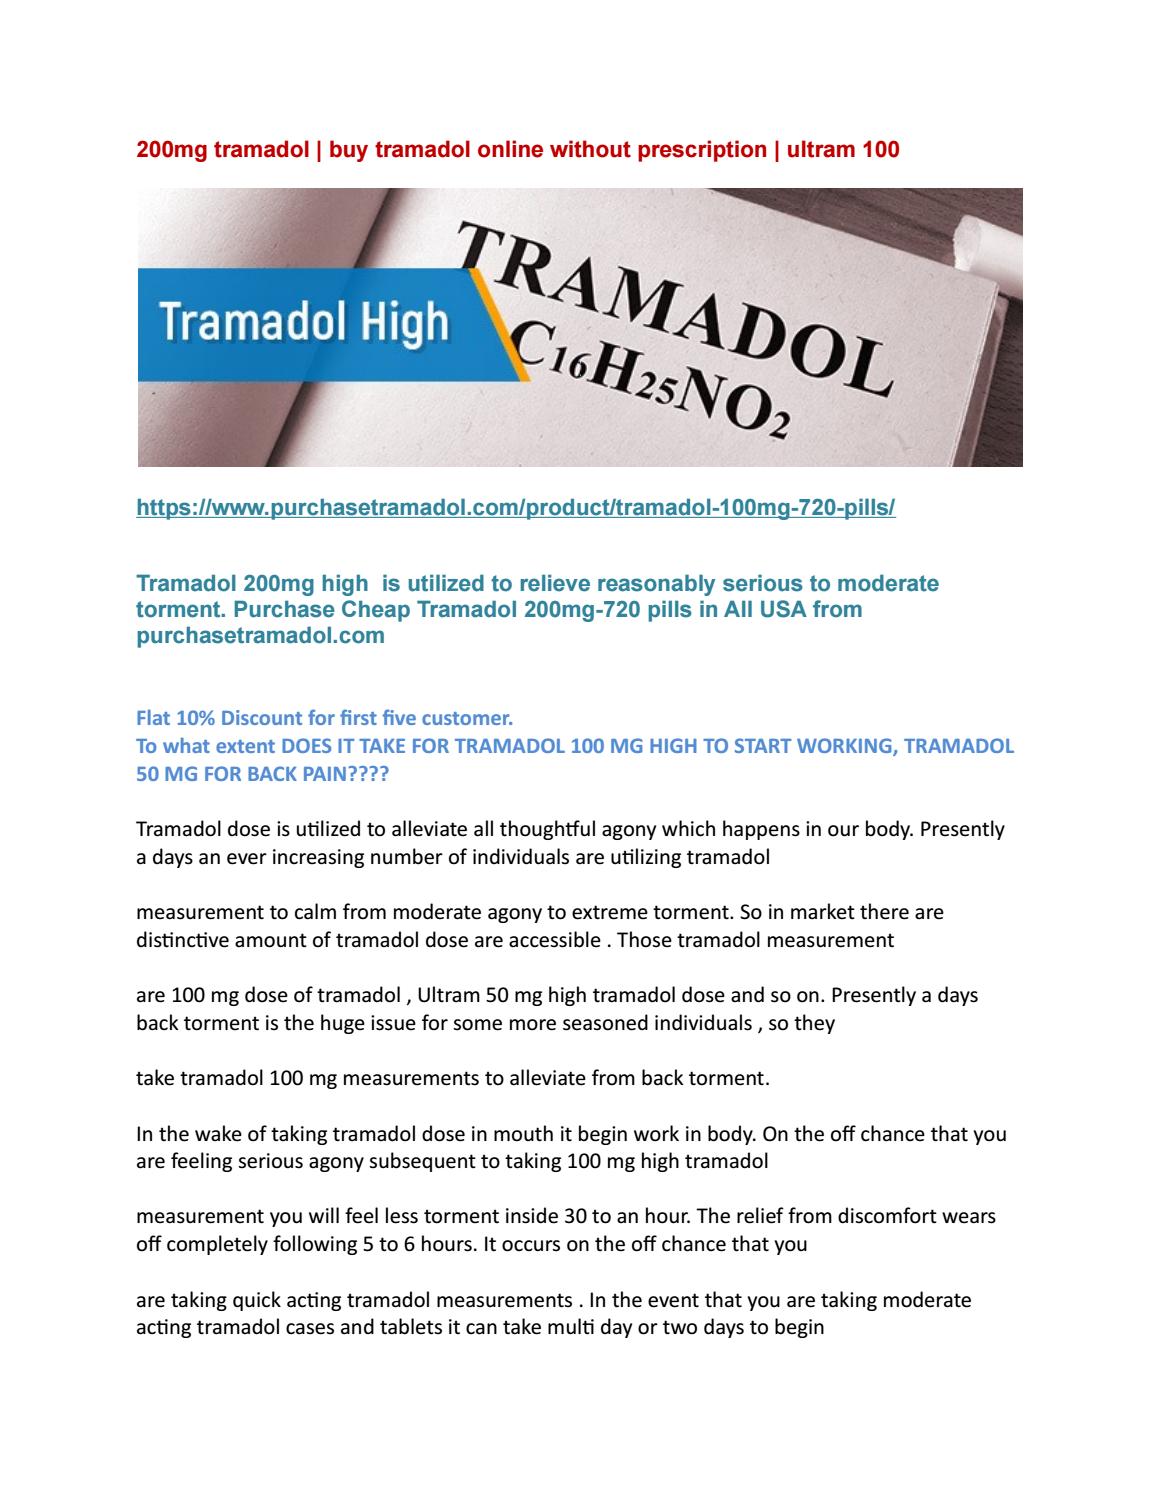 Purchase tramadol